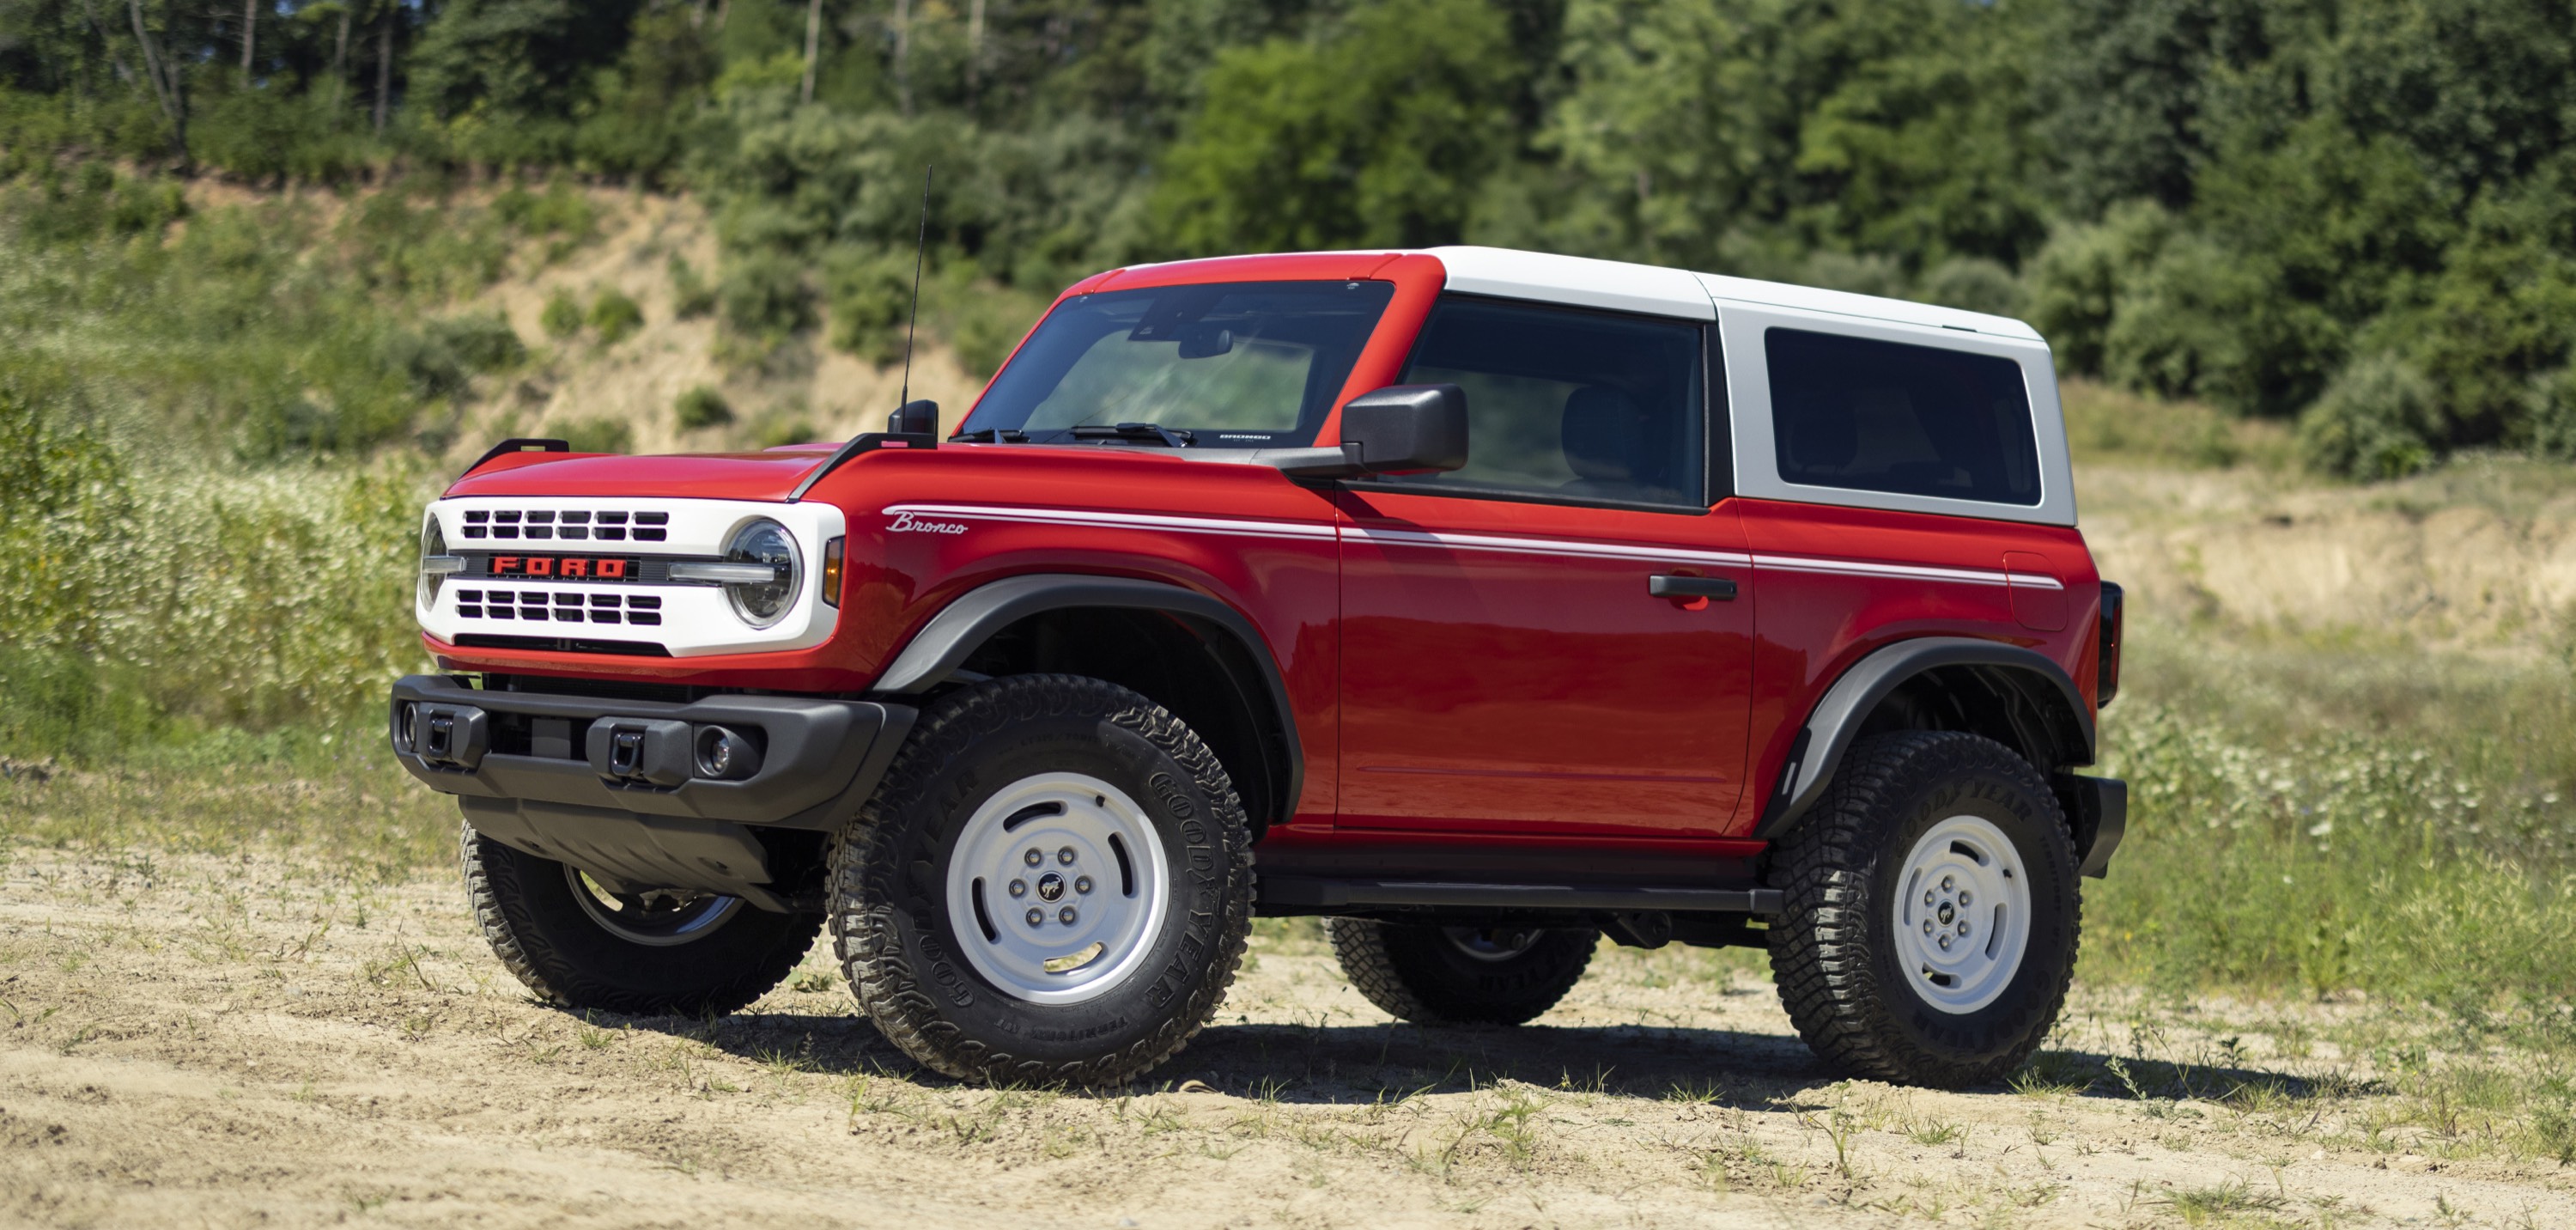 Ford Bronco Heritage Edition (2023) pictures & information